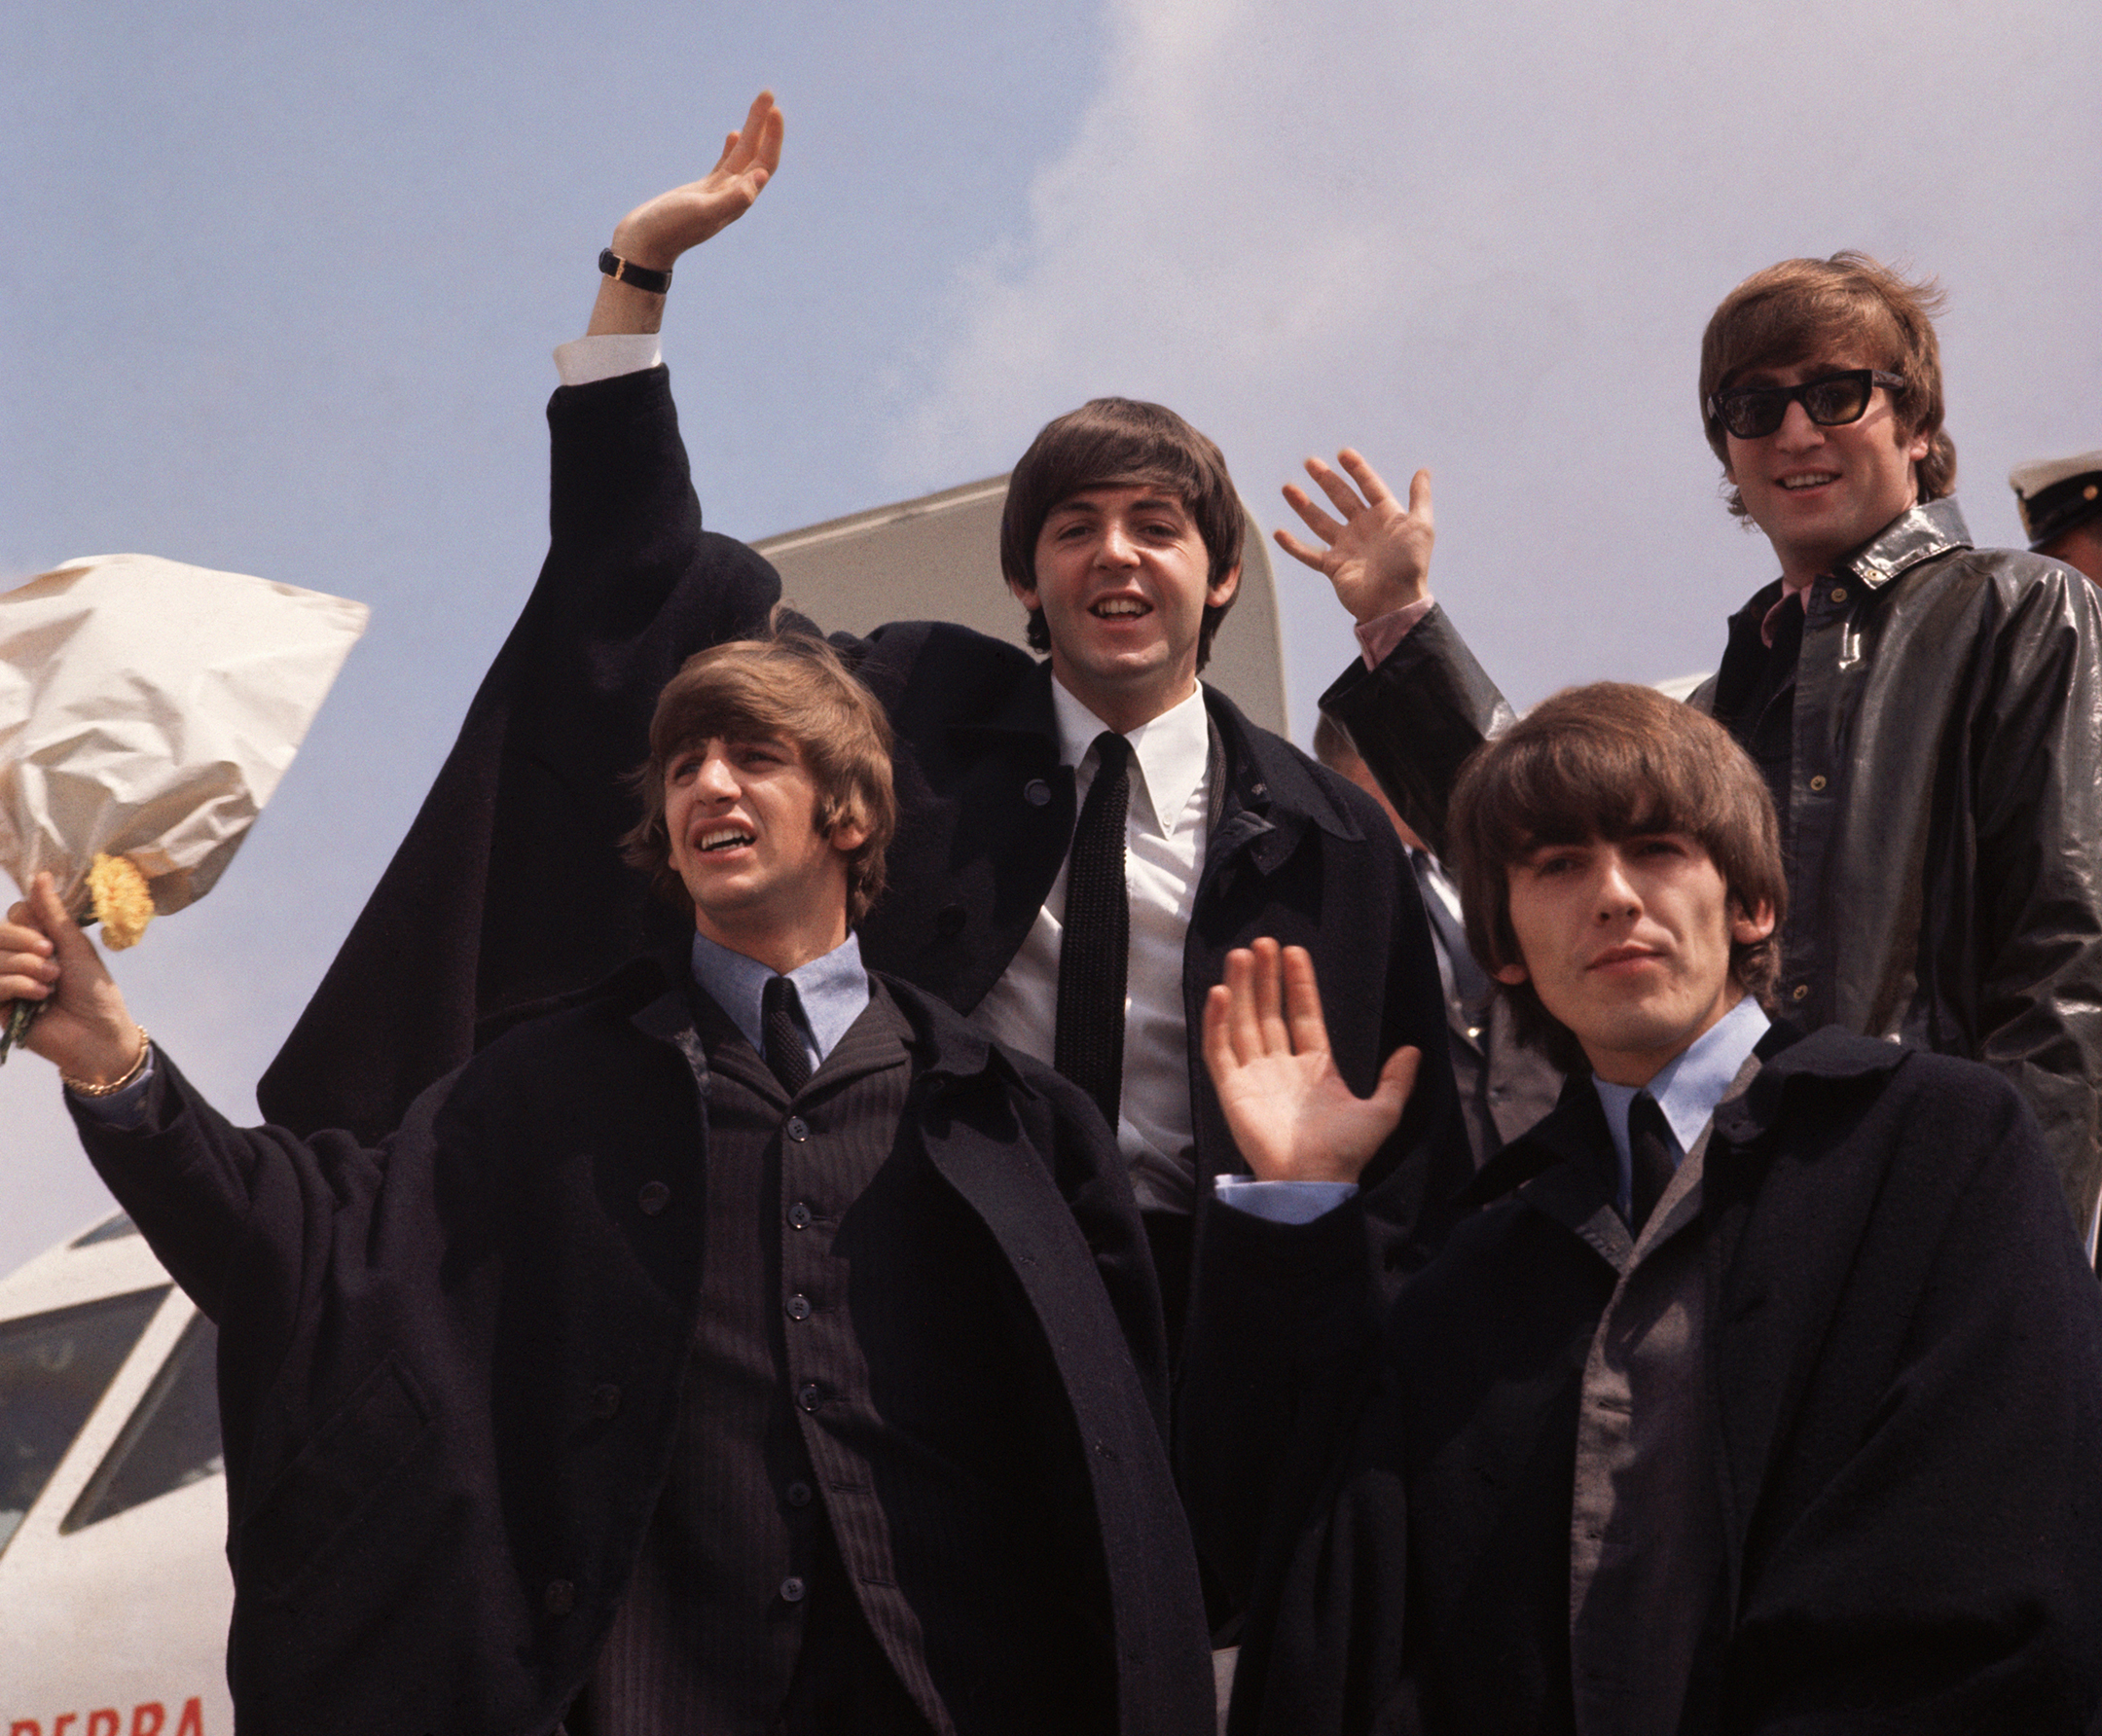 The Beatles smiling and waving from the top of a set of steps attached to an airplane